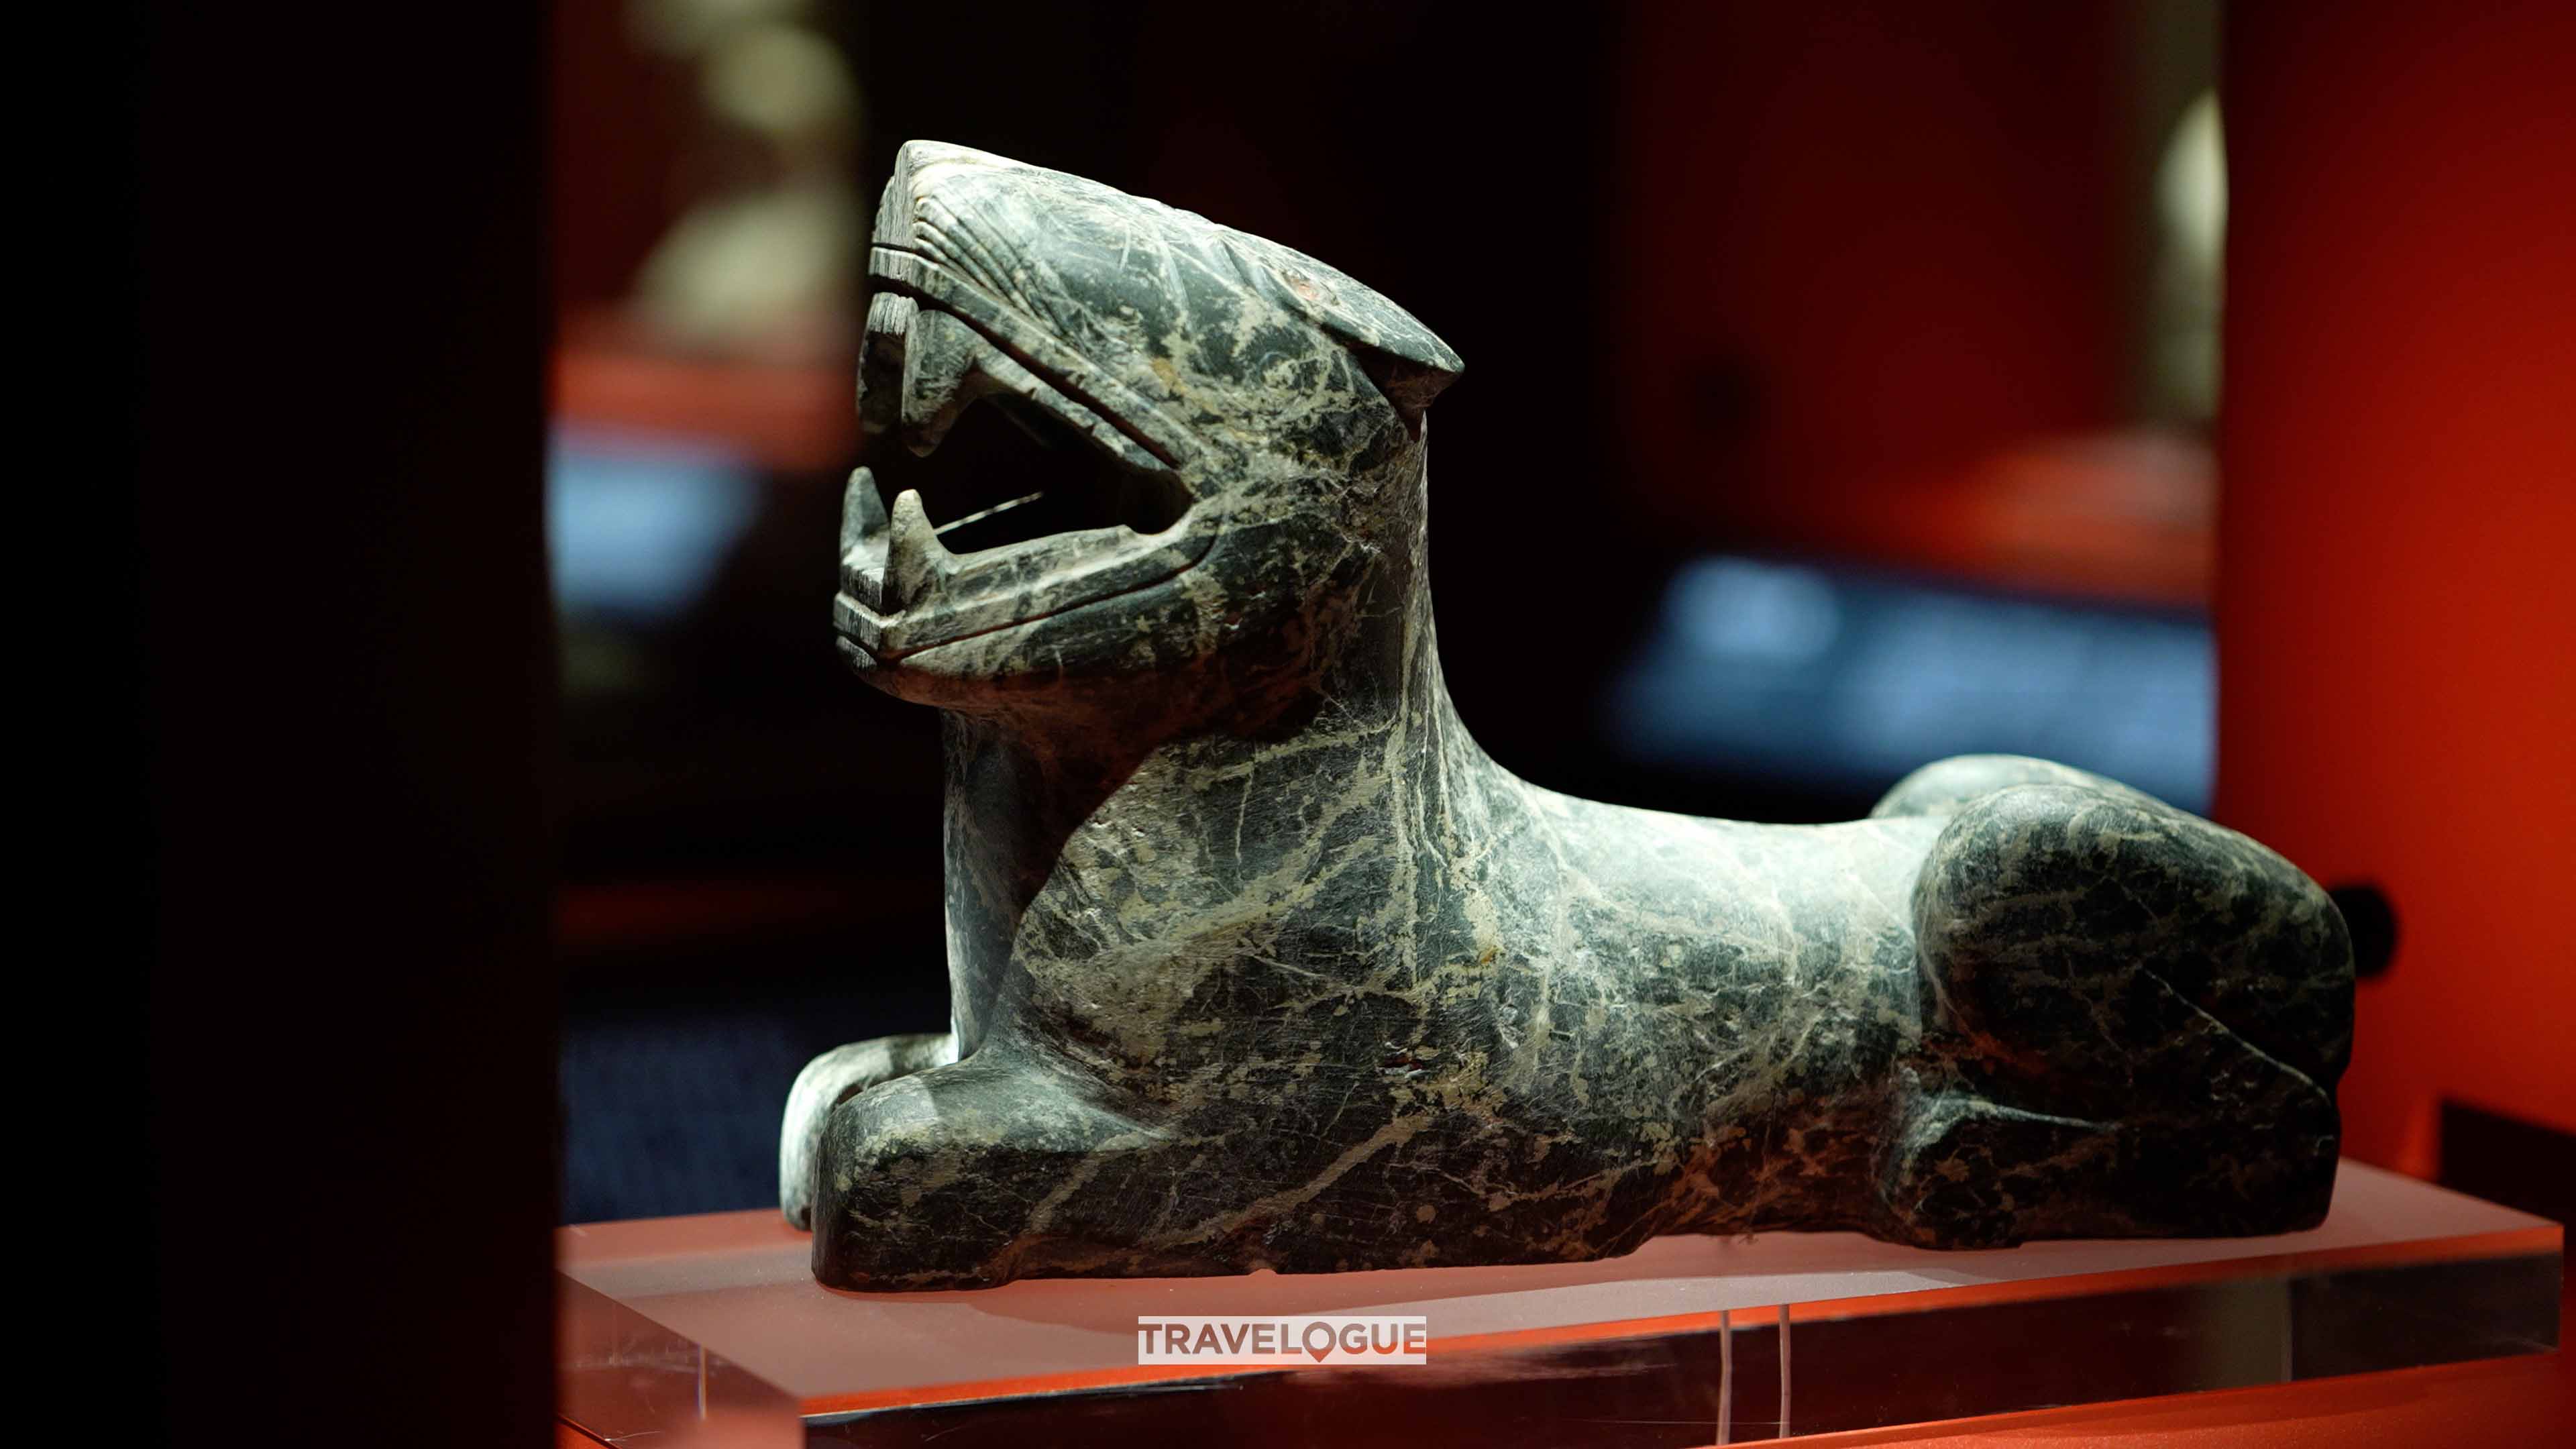 A stone carving is on display at the Jinsha Site Museum in Chengdu, Sichuan Province. /CGTN